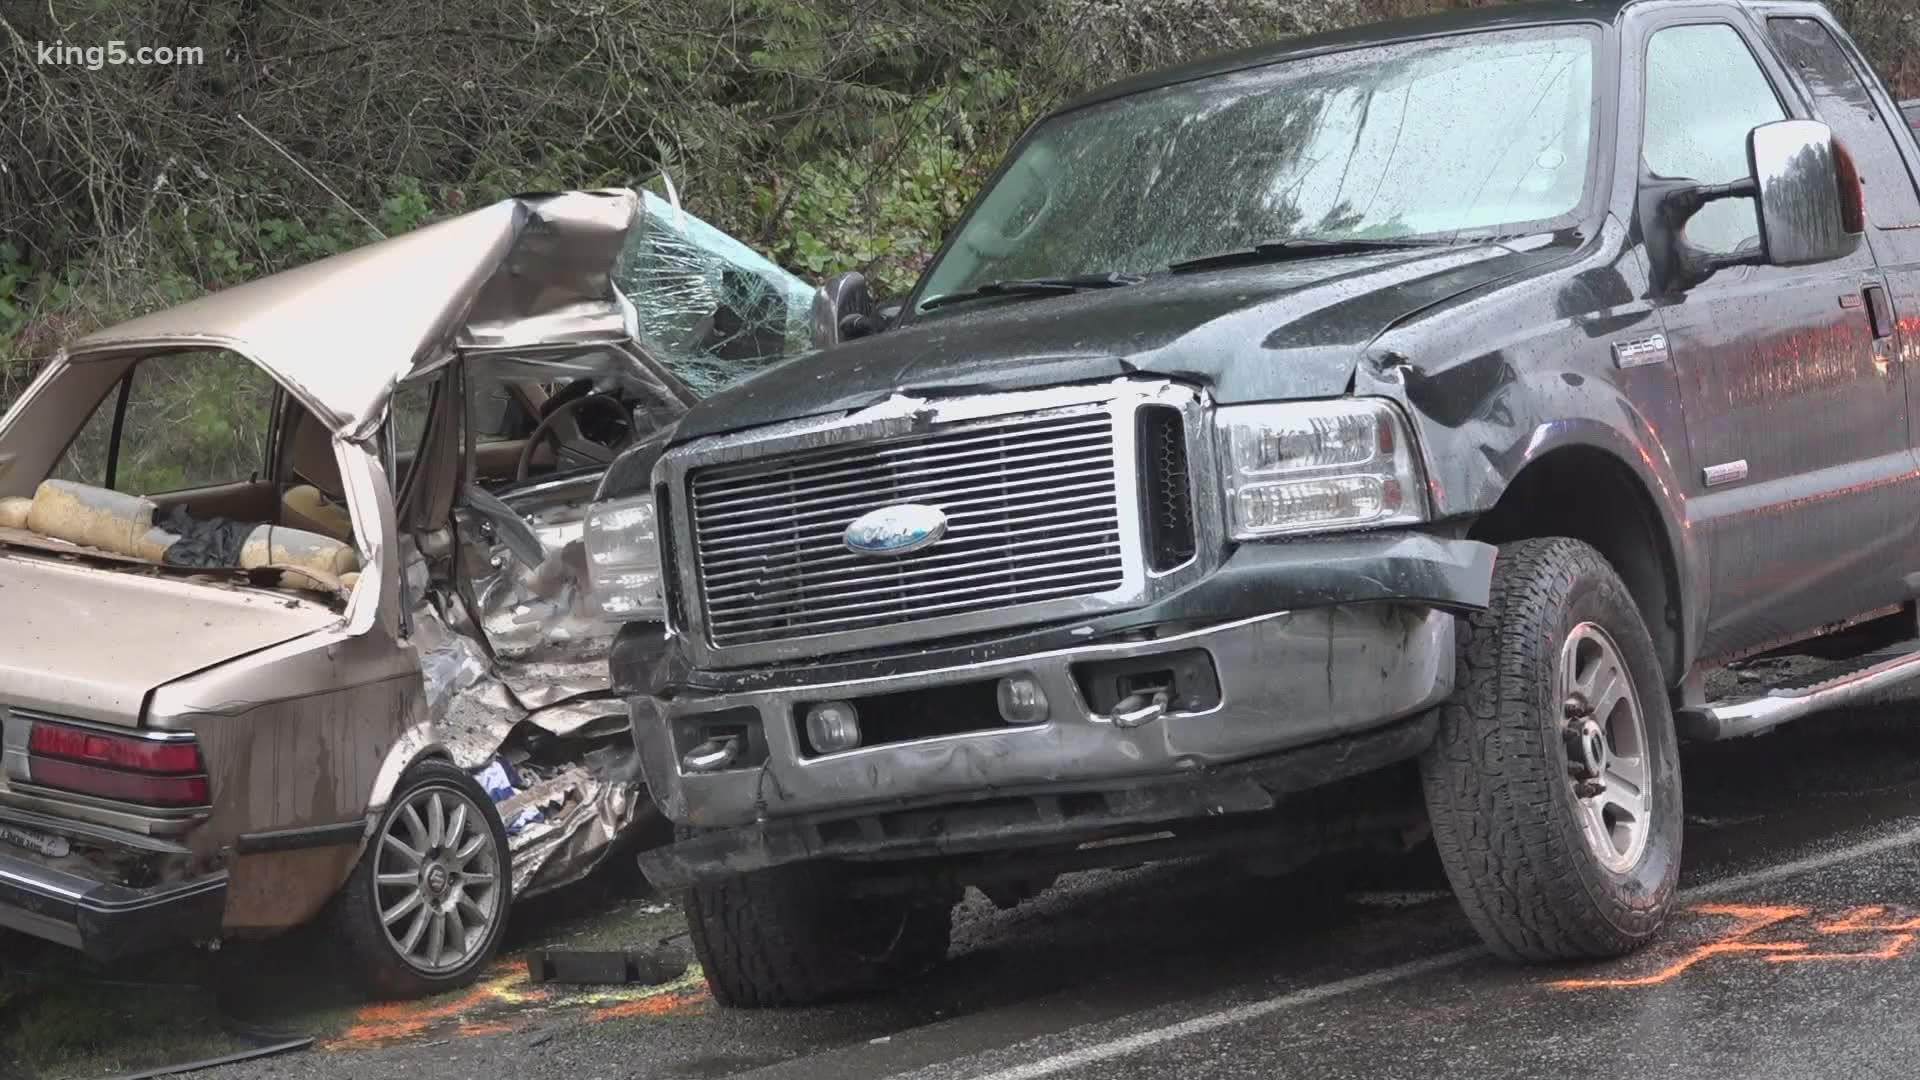 Two people involved in the crash were airlifted to the hospital, but did not survive, according to Washington State Patrol.